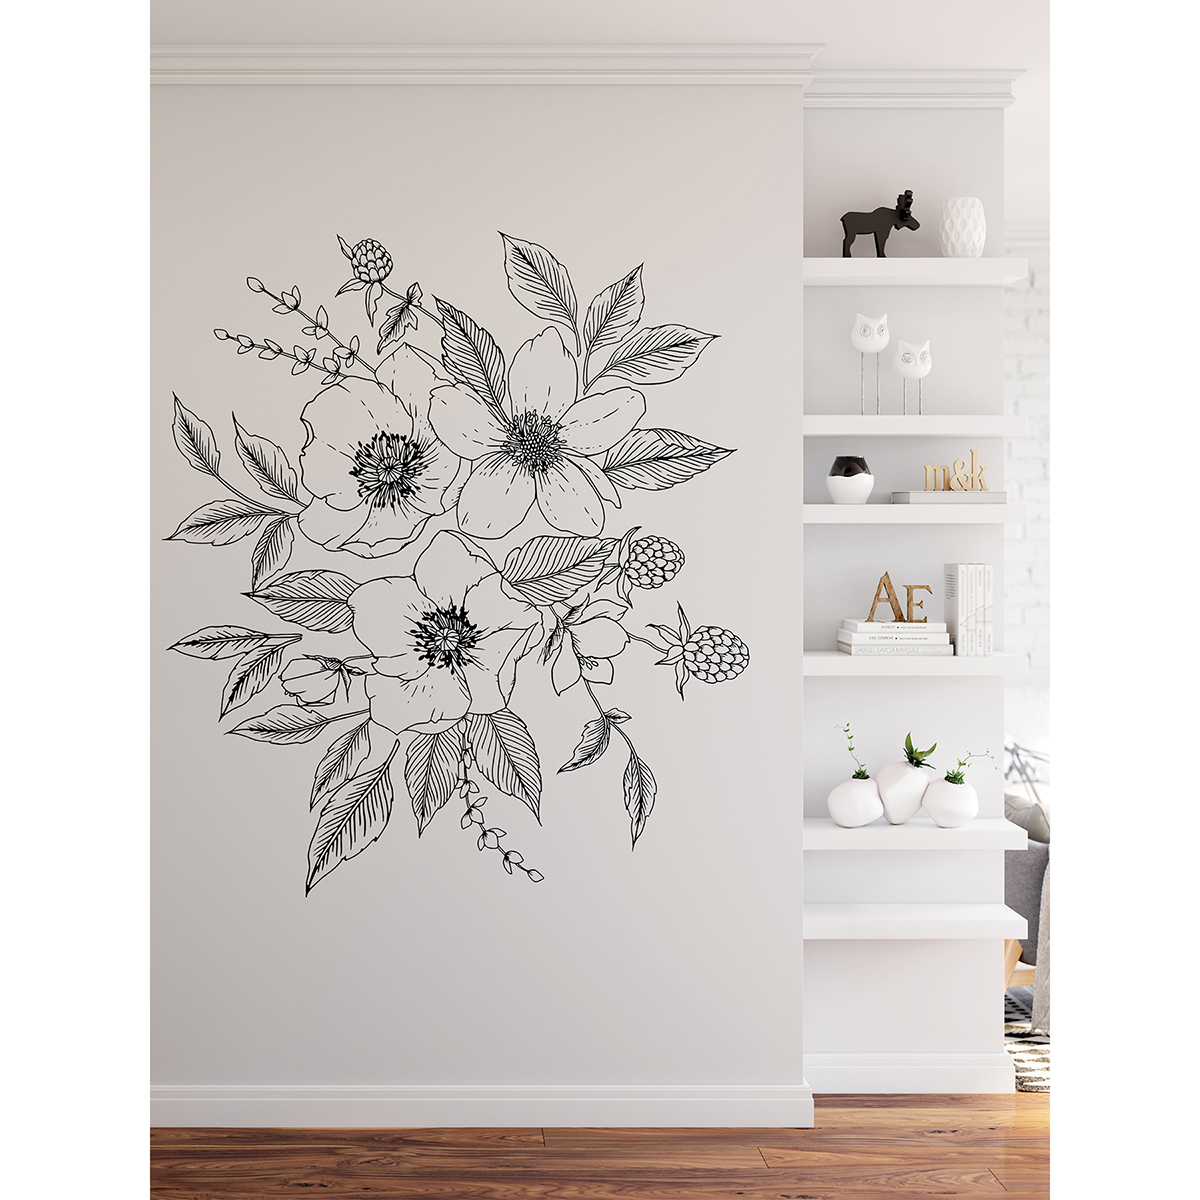 Dwpk3902 Love Karla Designs Anemone And Blackberry Wall Decals By 